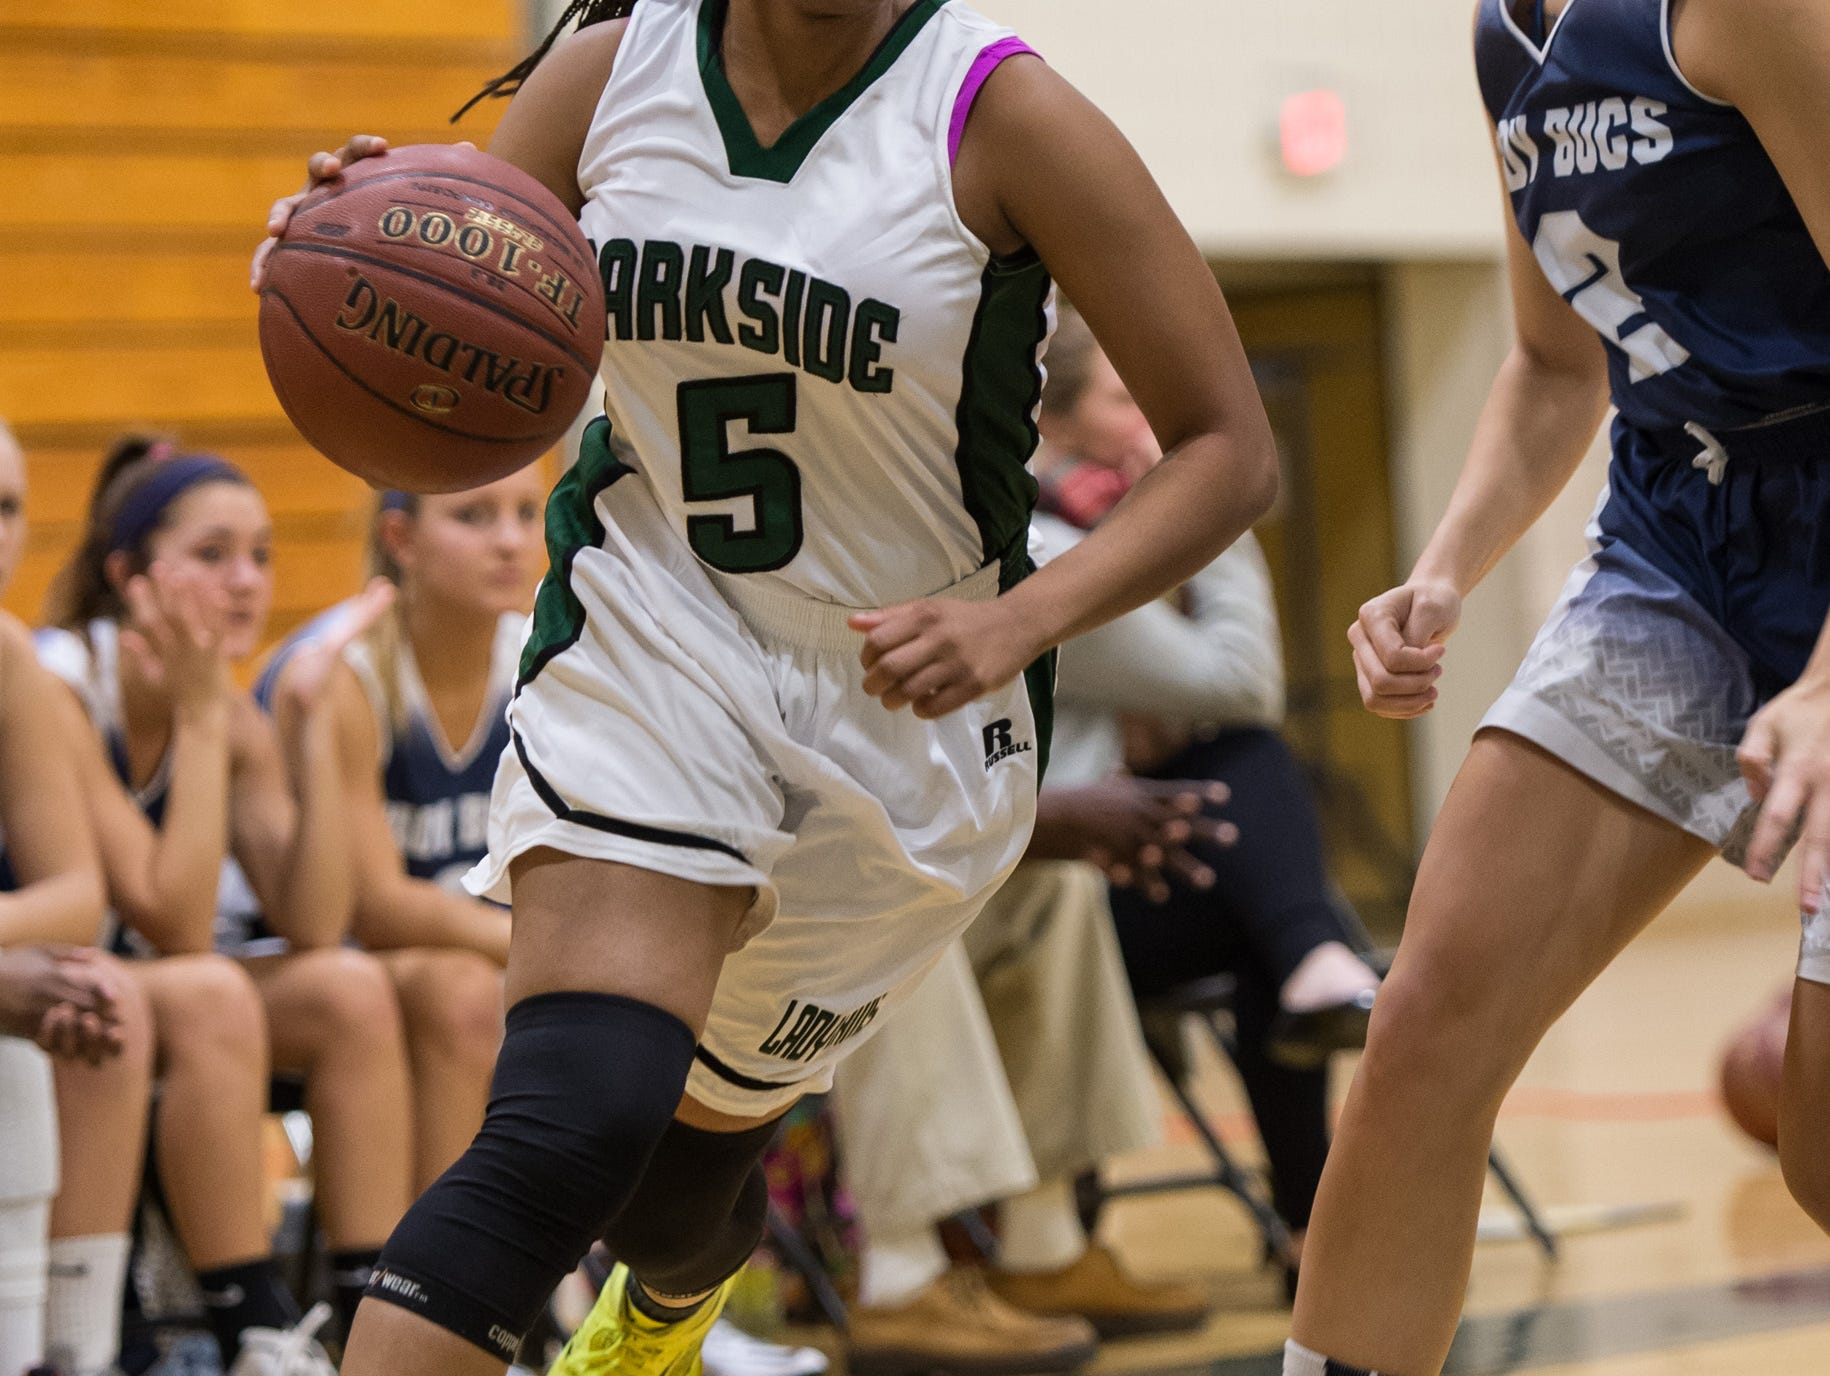 Parkside's T. Jackson (5) drives the ball towards the net.